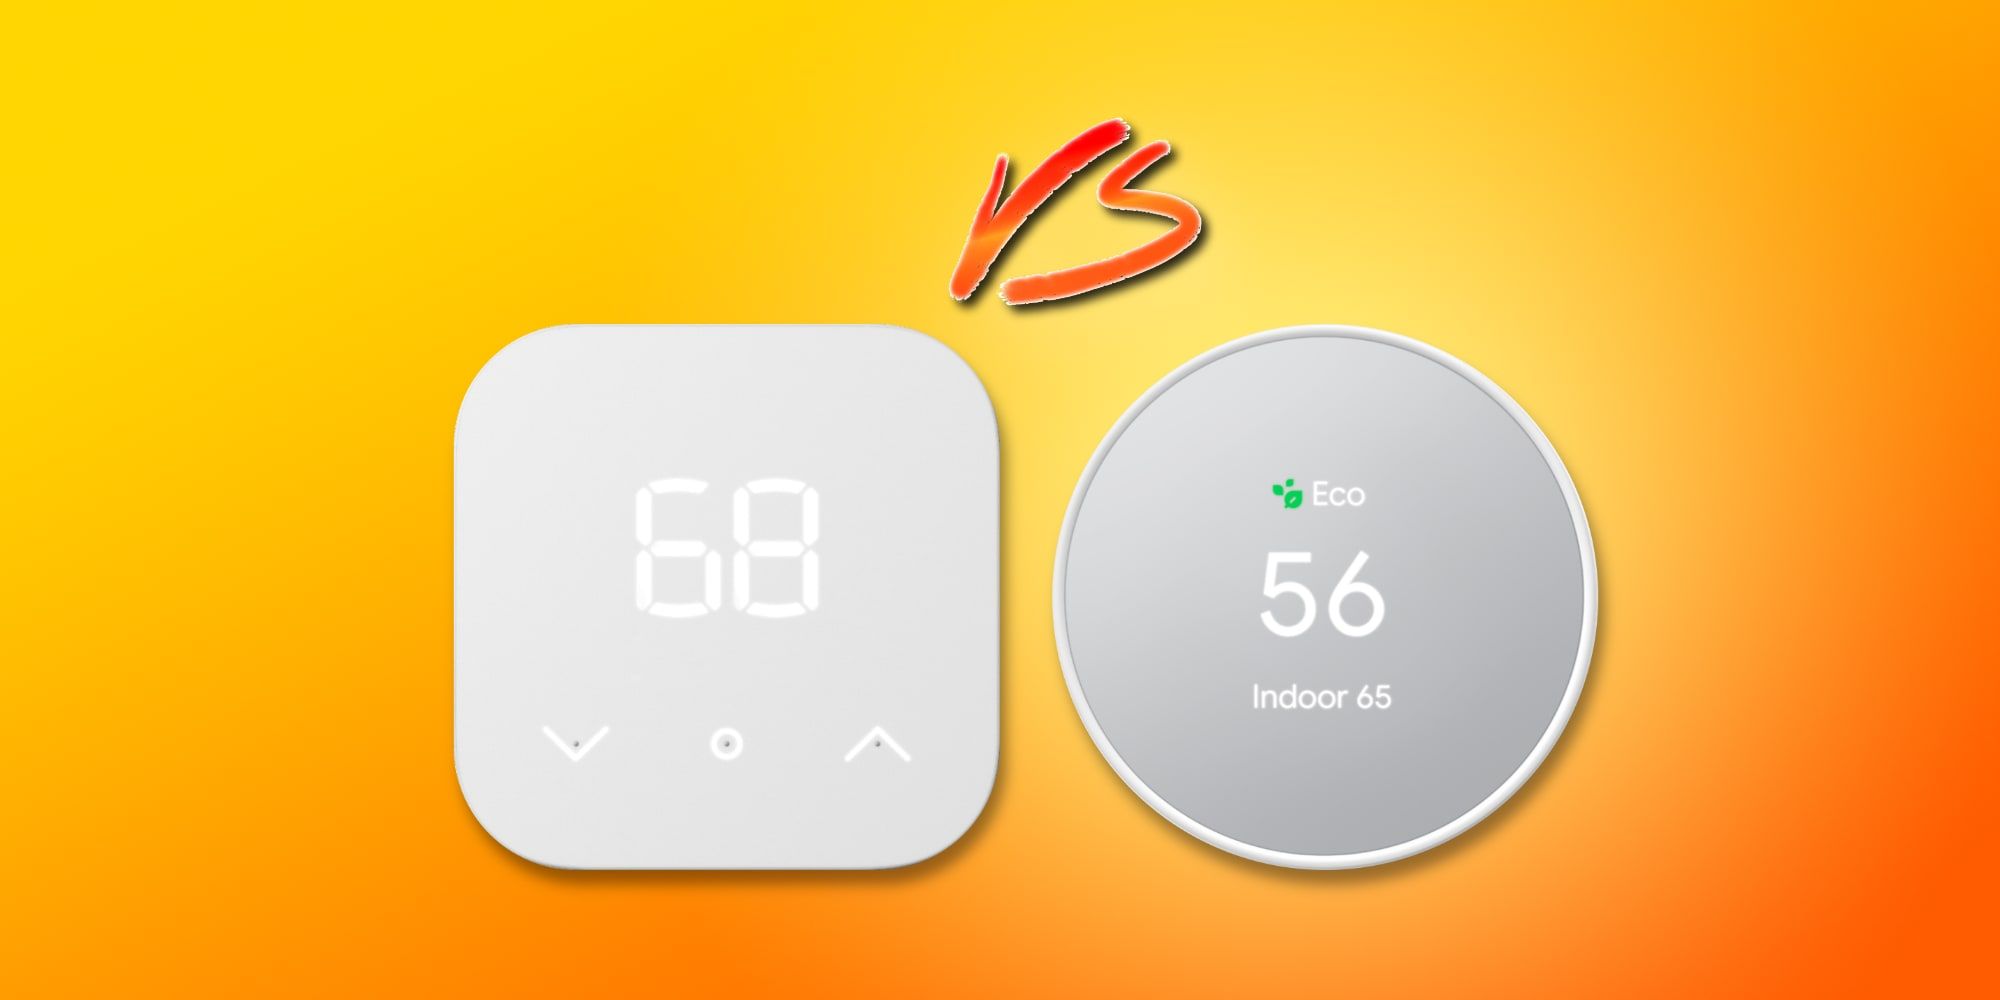 amazon-smart-thermostat-vs-nest-thermostat-is-google-s-worth-70-more